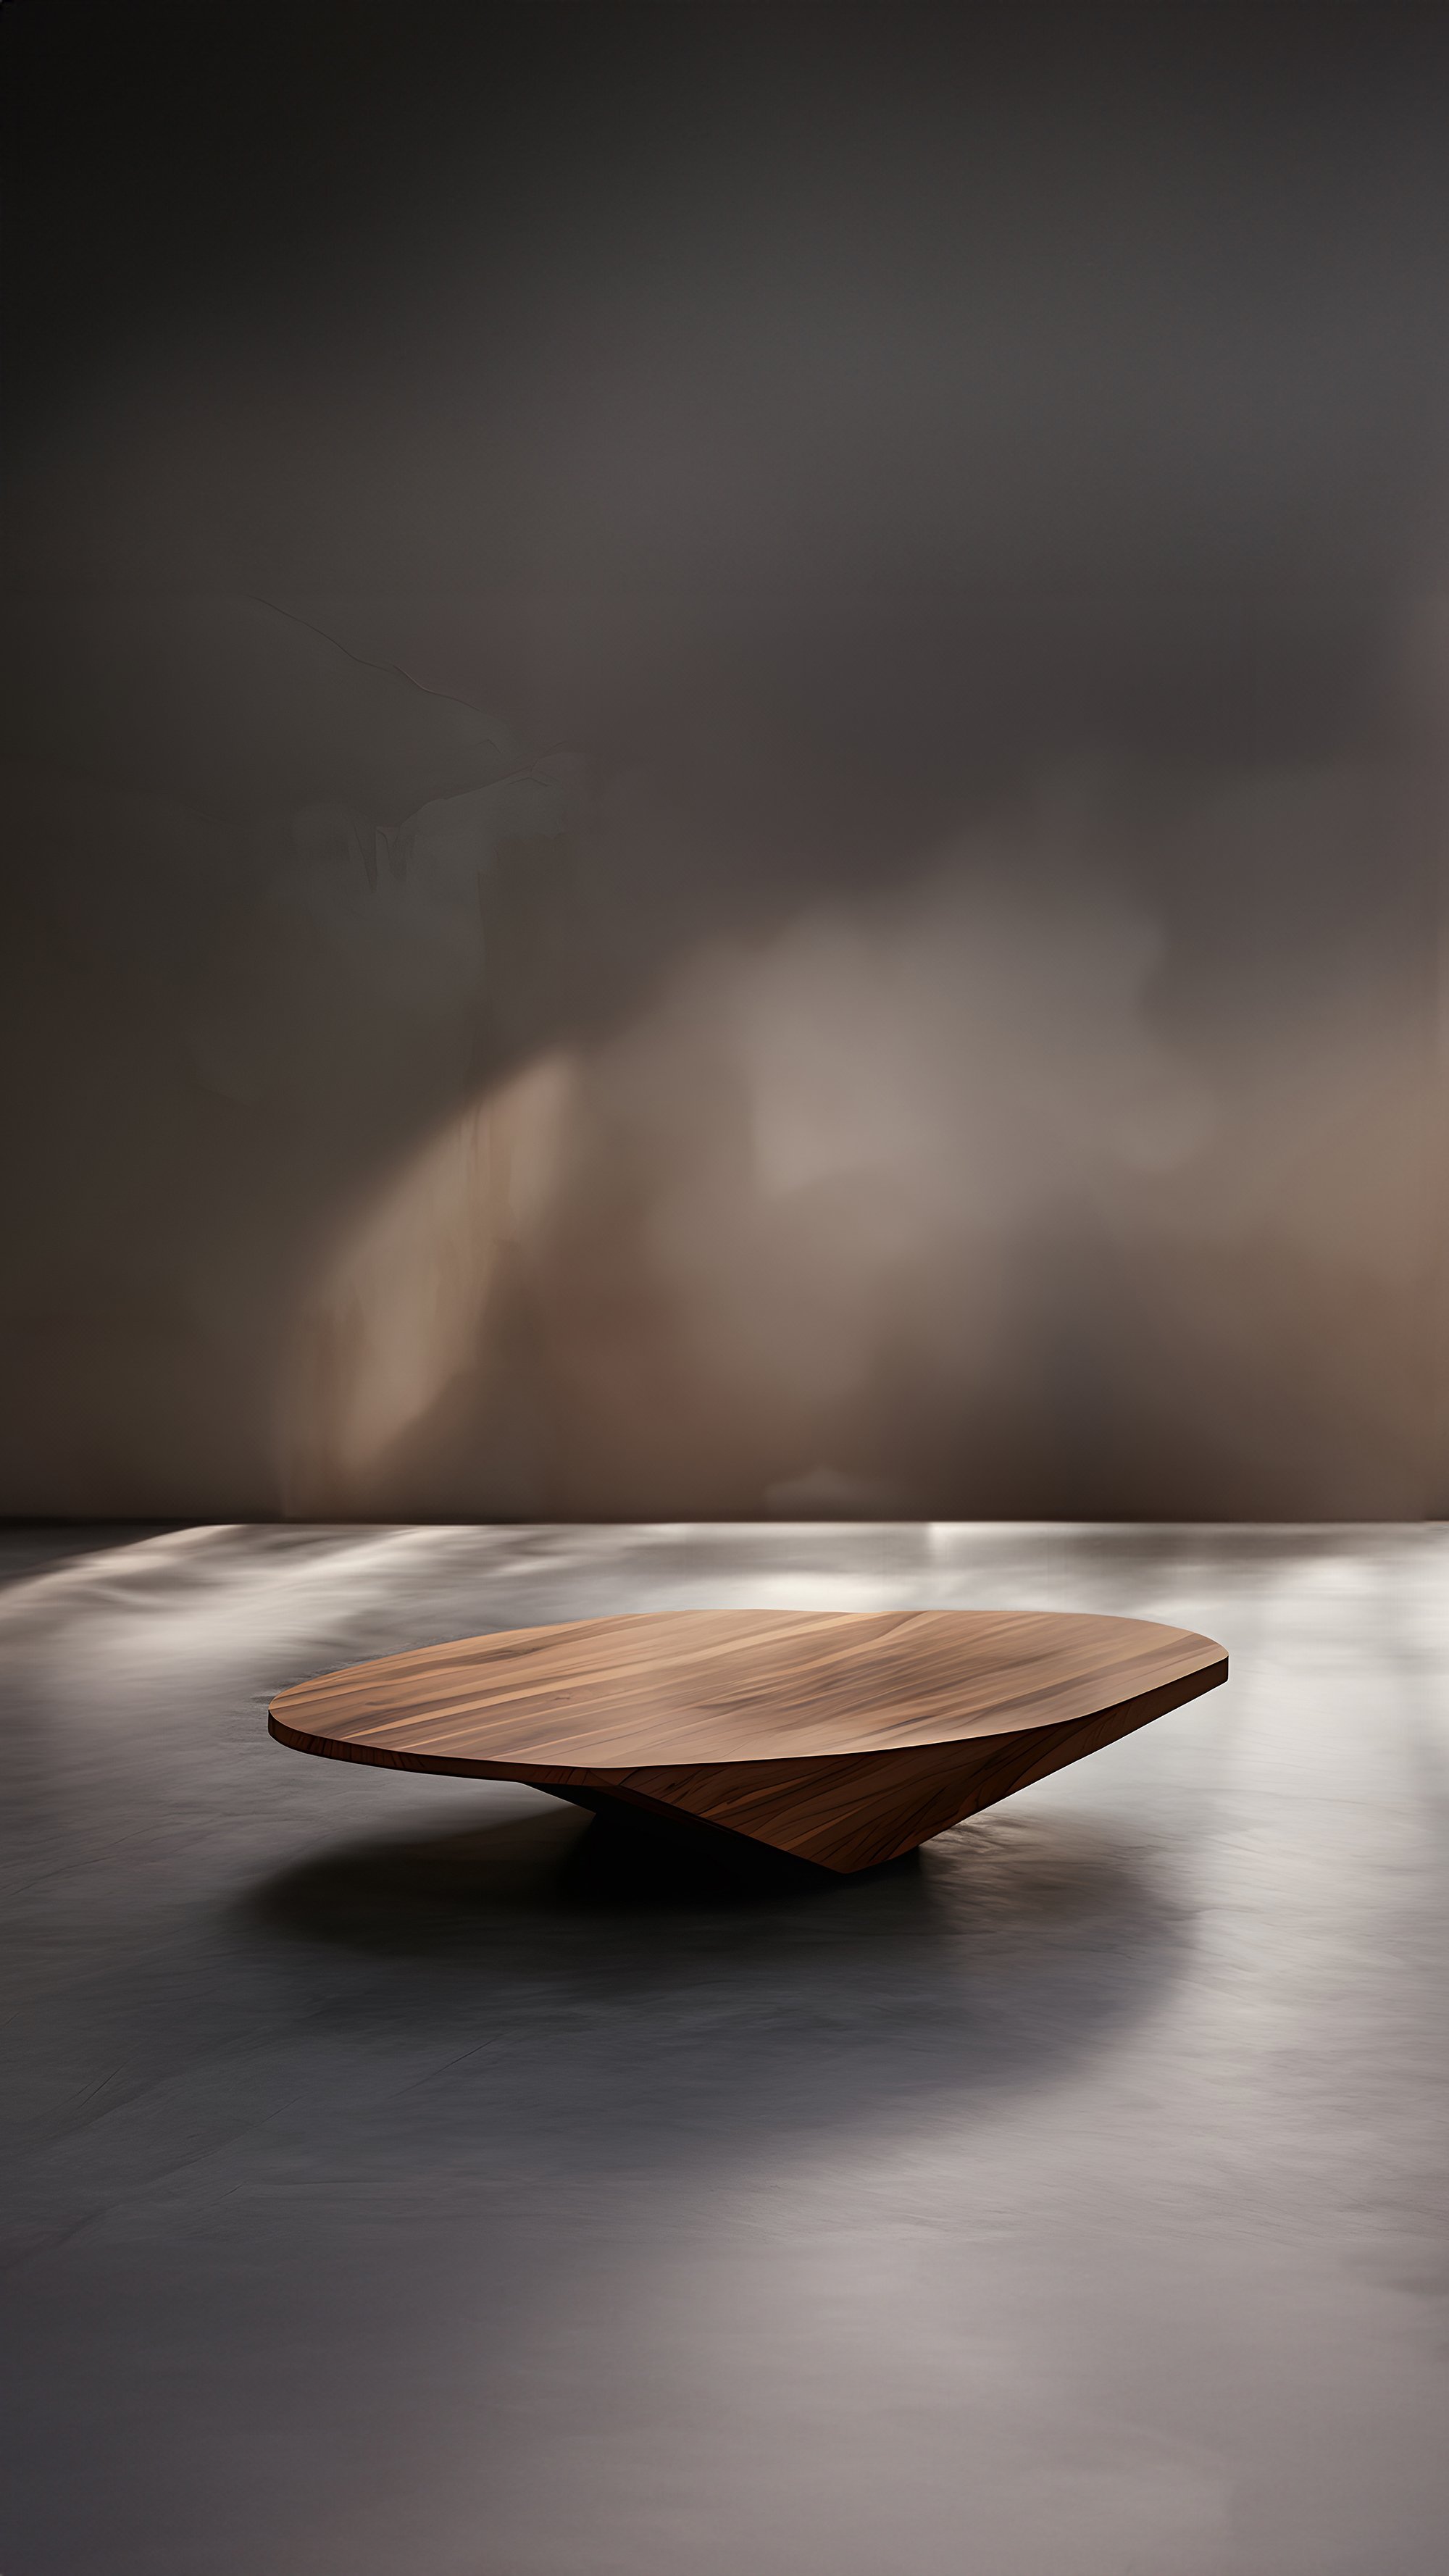 Sculptural Coffee Table Made of Solid Wood, Center Table Solace S51 by Joel Escalona — 8.jpg